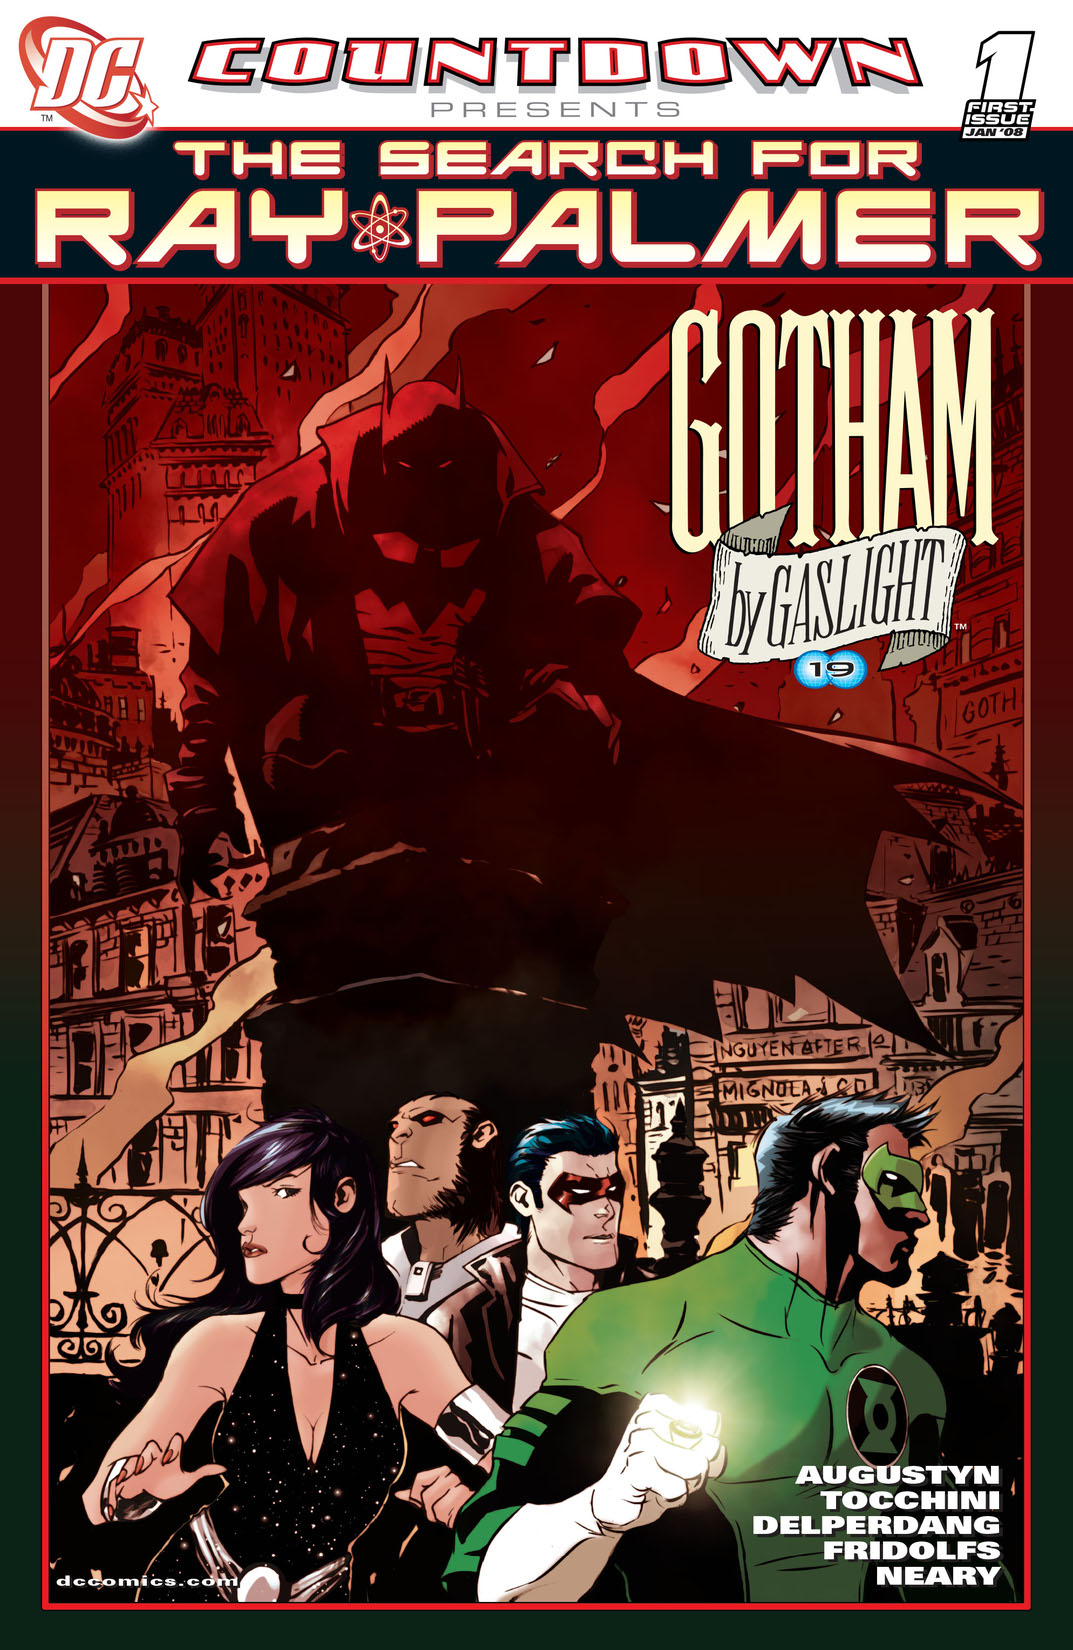 Countdown Presents the Search for Ray Palmer: Gotham by Gaslight #1 preview images